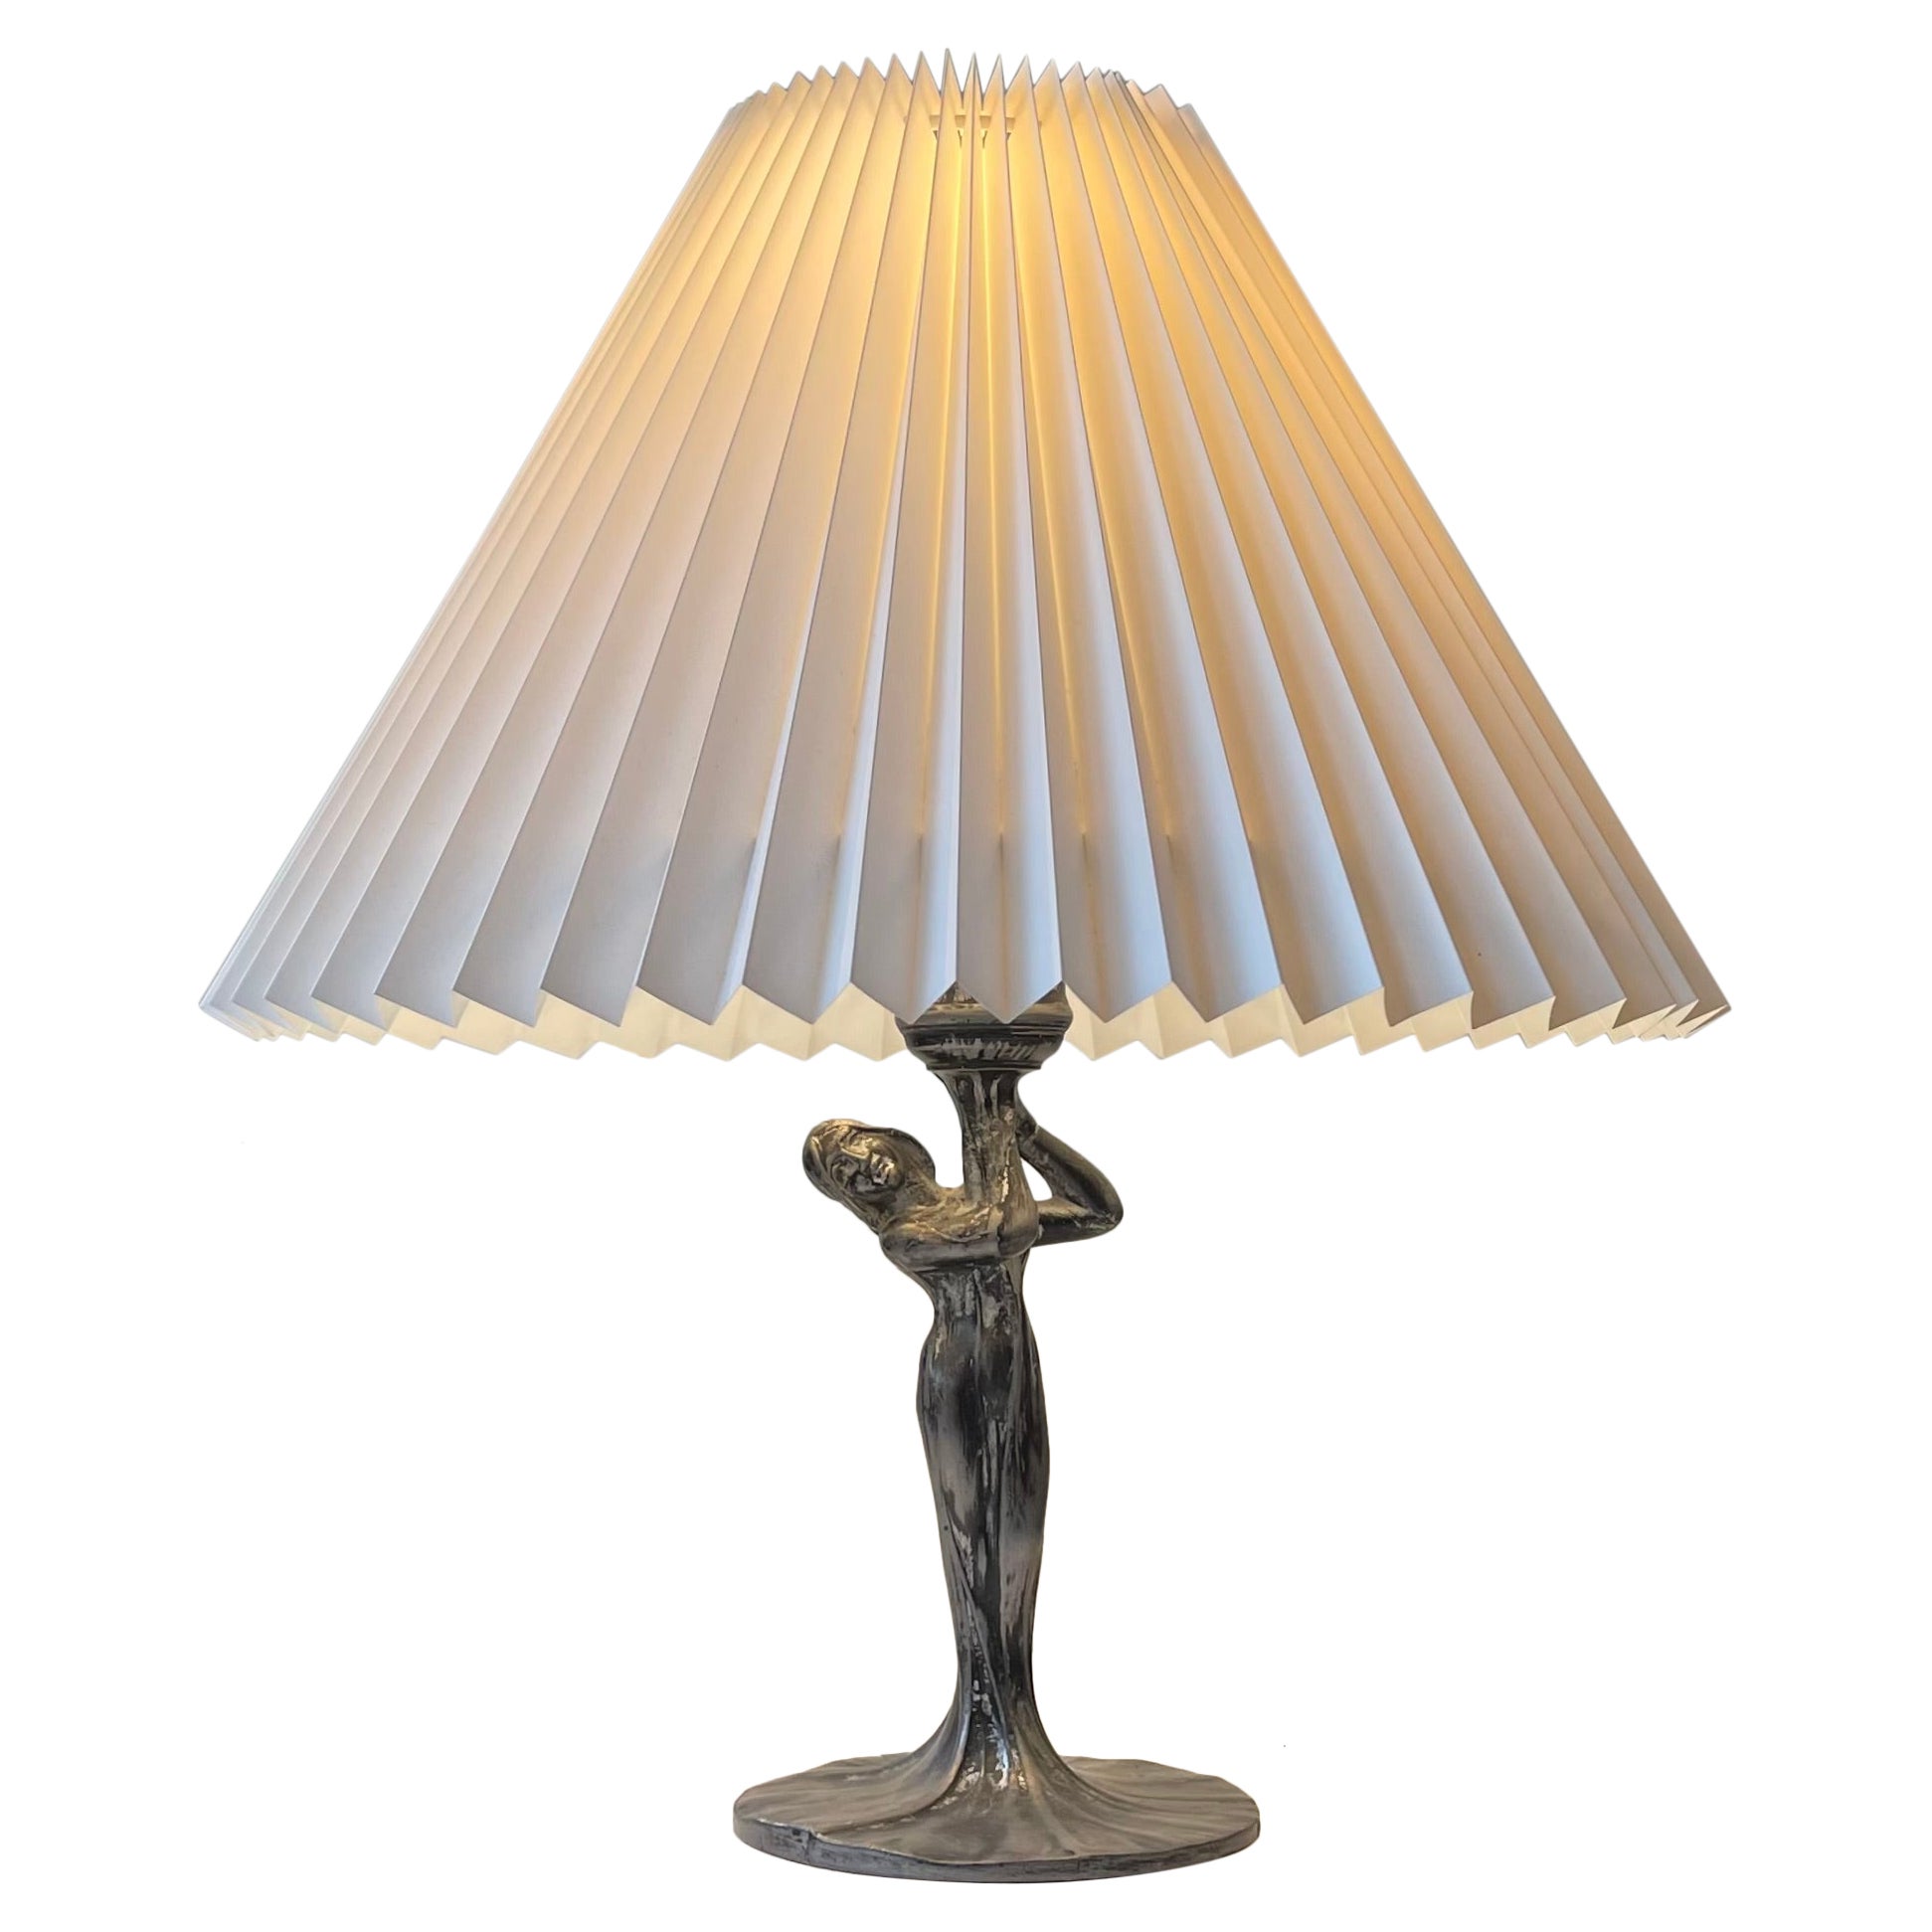 French Art Deco 'Dress' Table Lamp in Pewter, 1930s For Sale